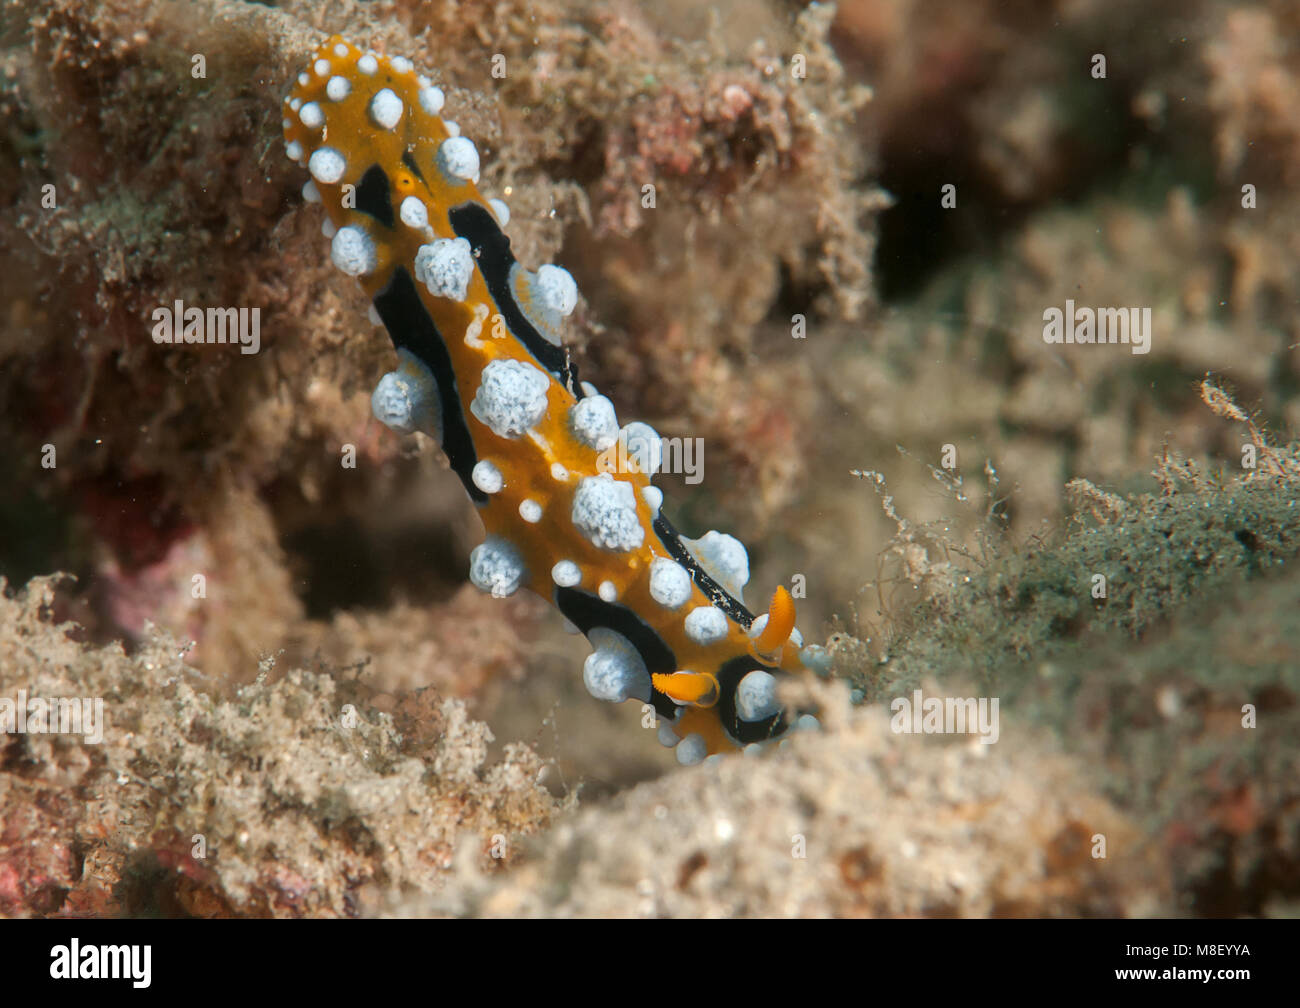 Ocellate phyllidia nudibranch ( Phyllidia ocellata ) crawling on corals of Bali,Indonesia. Stock Photo